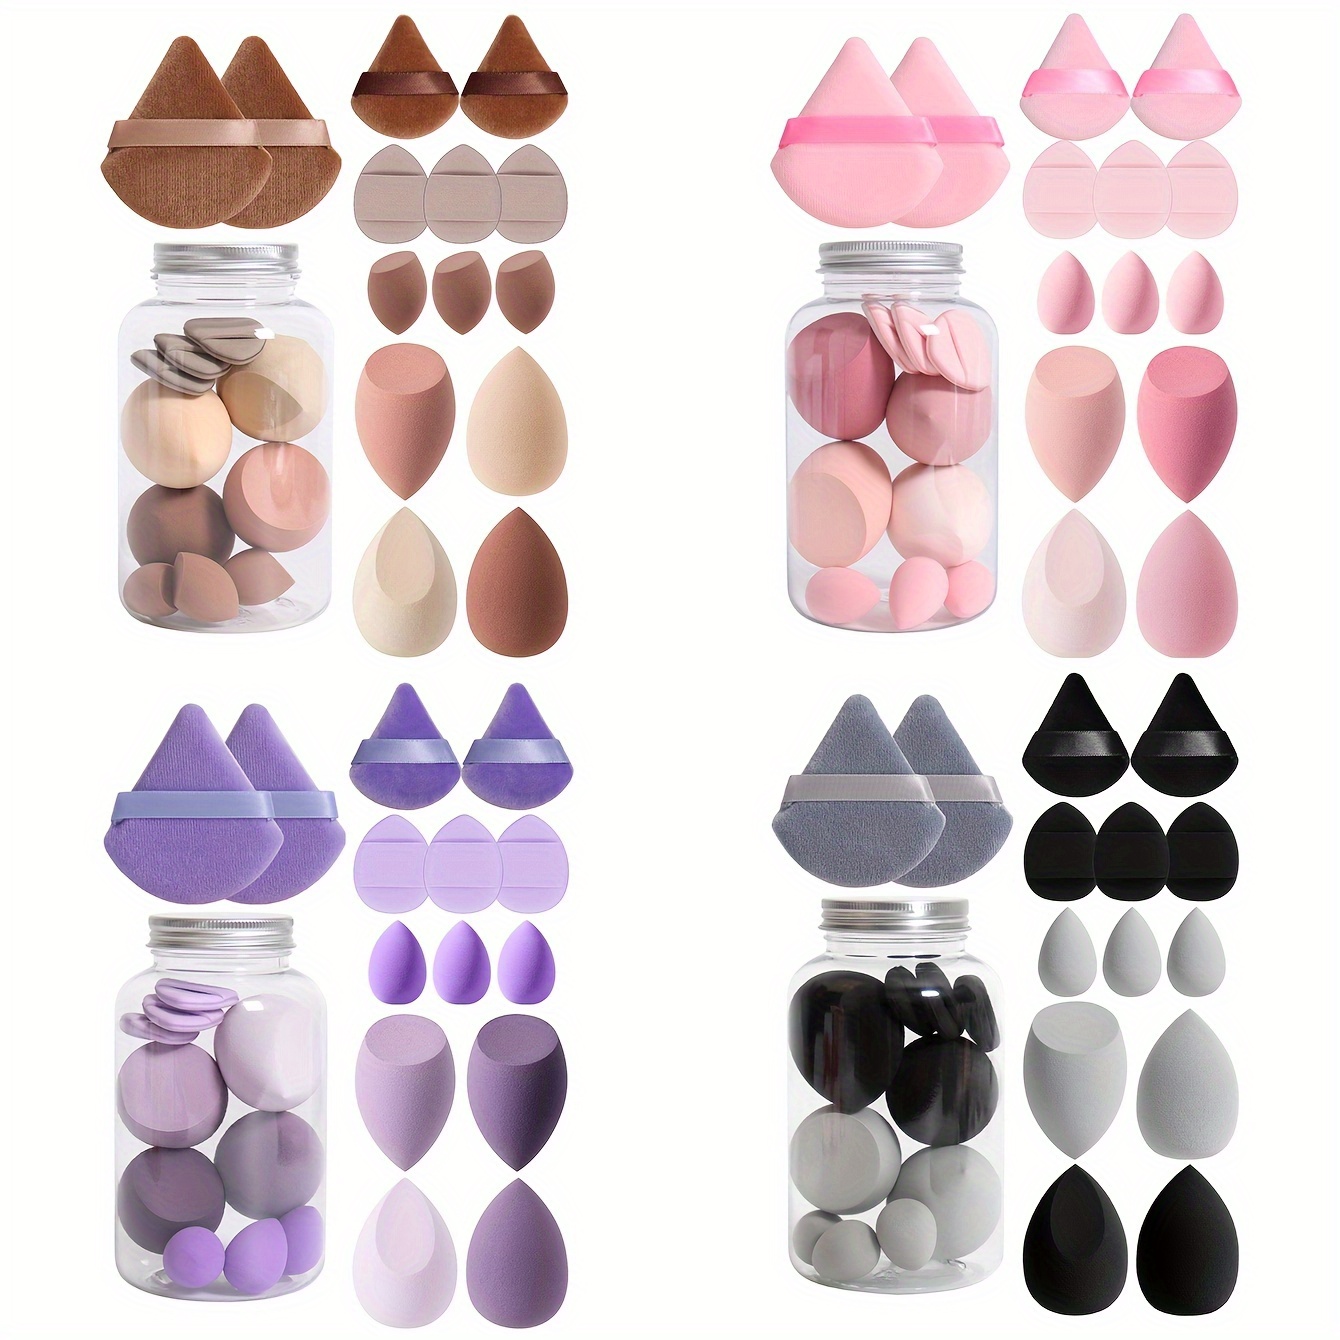 

14-piece Makeup Sponge Set With Storage Jar: Velvet Beauty Blenders, Latex-free, Dual-use Wet & Dry Foundation Puffs For All Skin Types